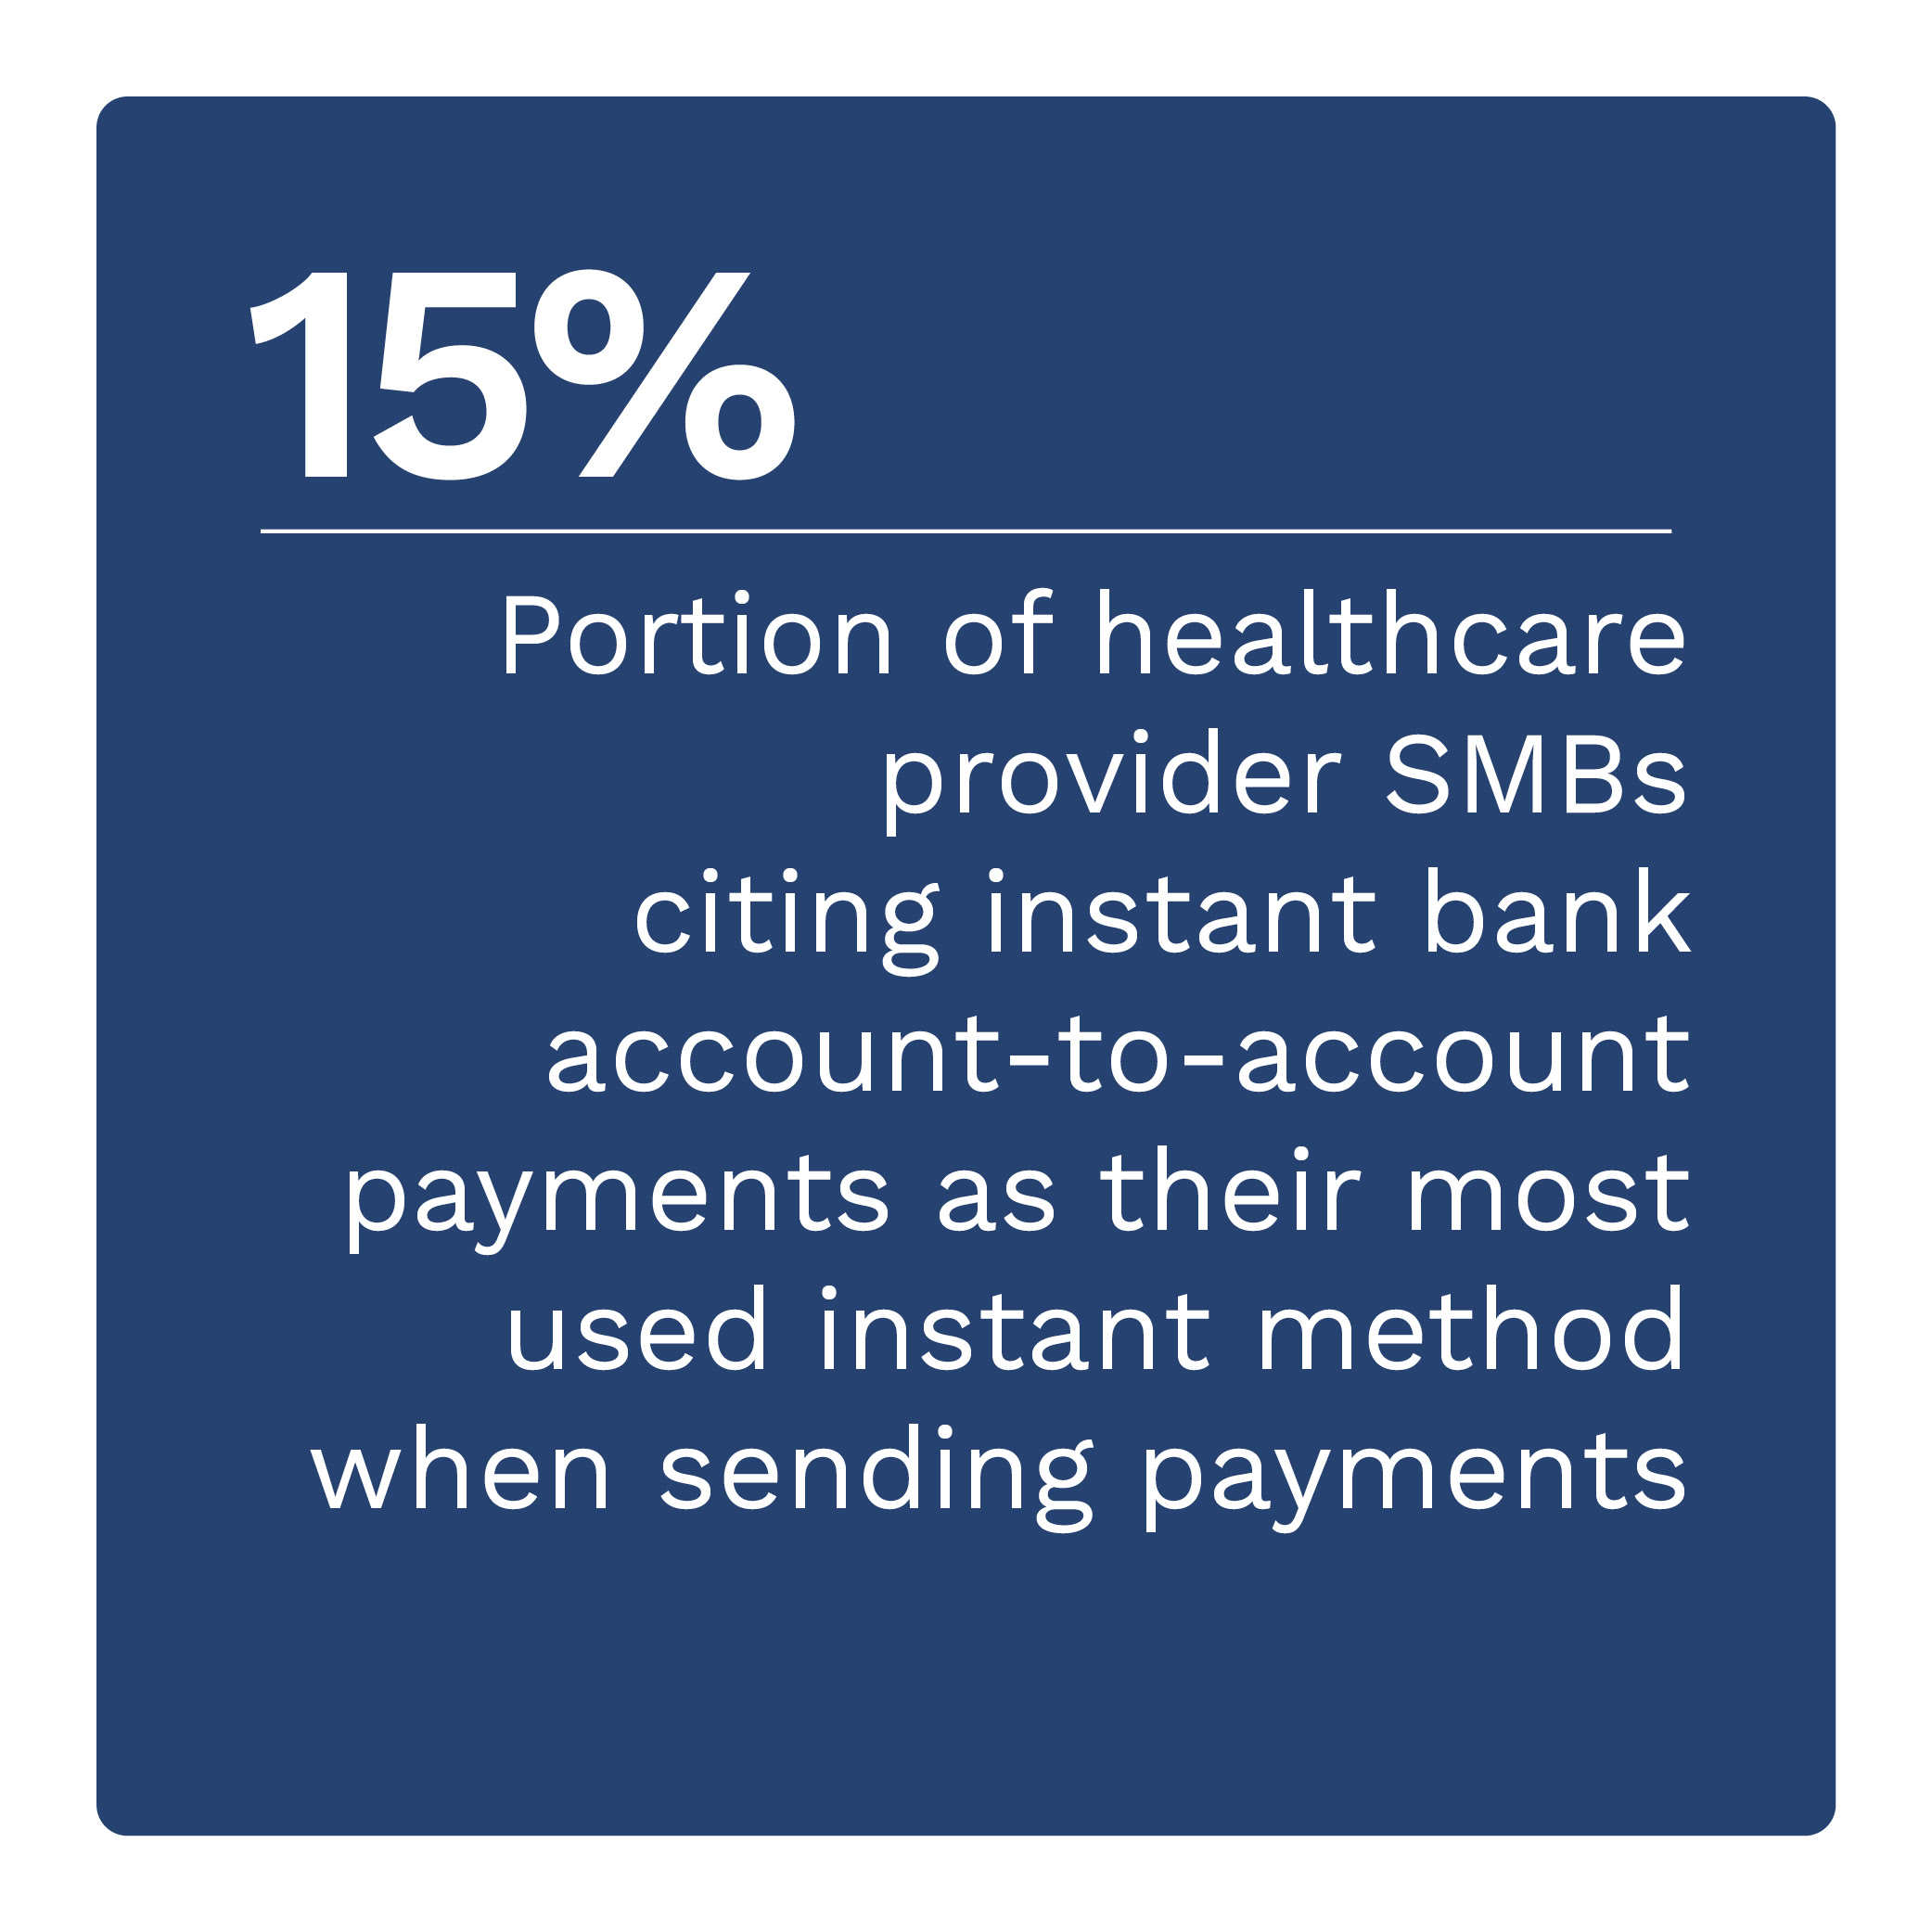 15%: Portion of healthcare provider SMBs citing instant bank account-to-account payments as their most used instant method when sending payments